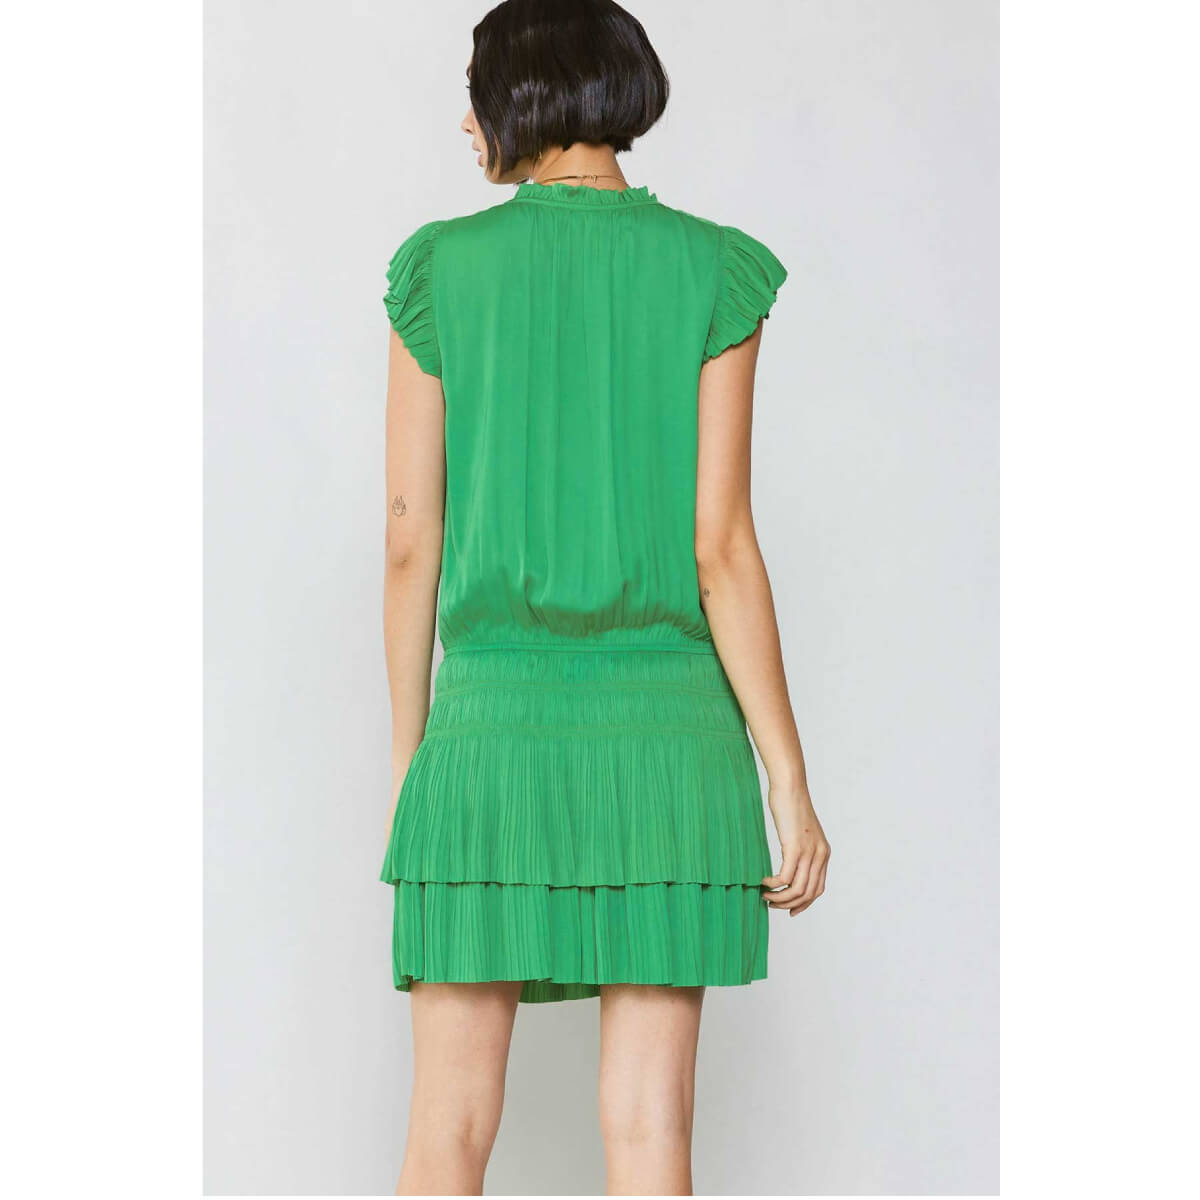 Pleated Skirt Mini Dress green back  | MILK MONEY milkmoney.co | cute clothes for women. womens online clothing. trendy online clothing stores. womens casual clothing online. trendy clothes online. trendy women's clothing online. ladies online clothing stores. trendy women's clothing stores. cute female clothes.